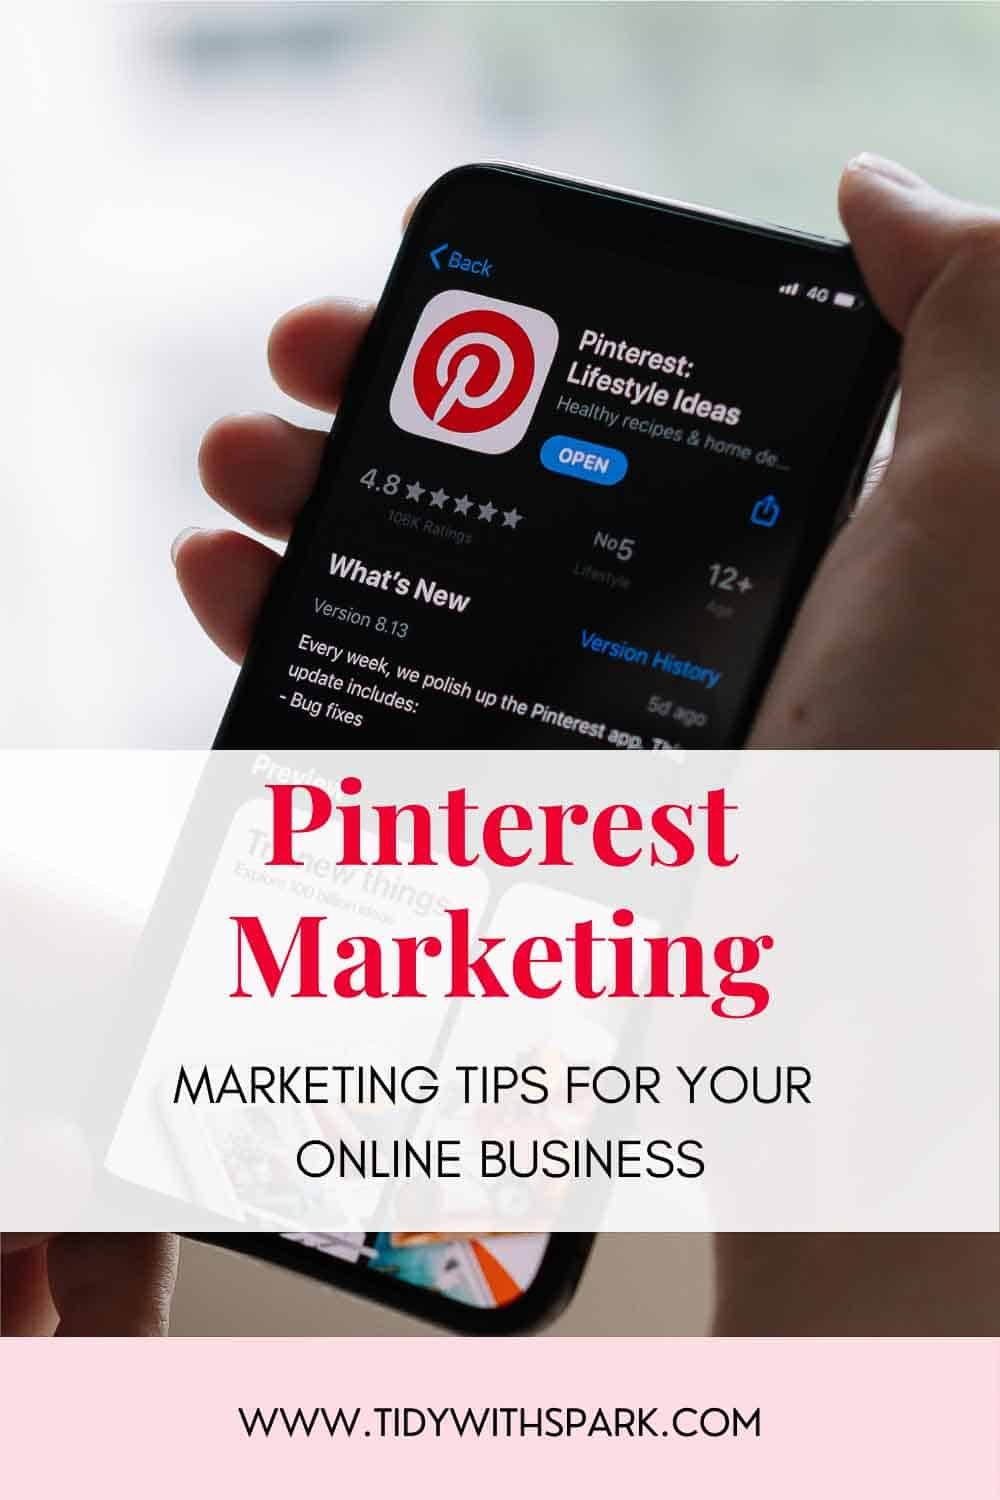 Promotional image for Marketing on Pinterest Tips for tidy with spark blog